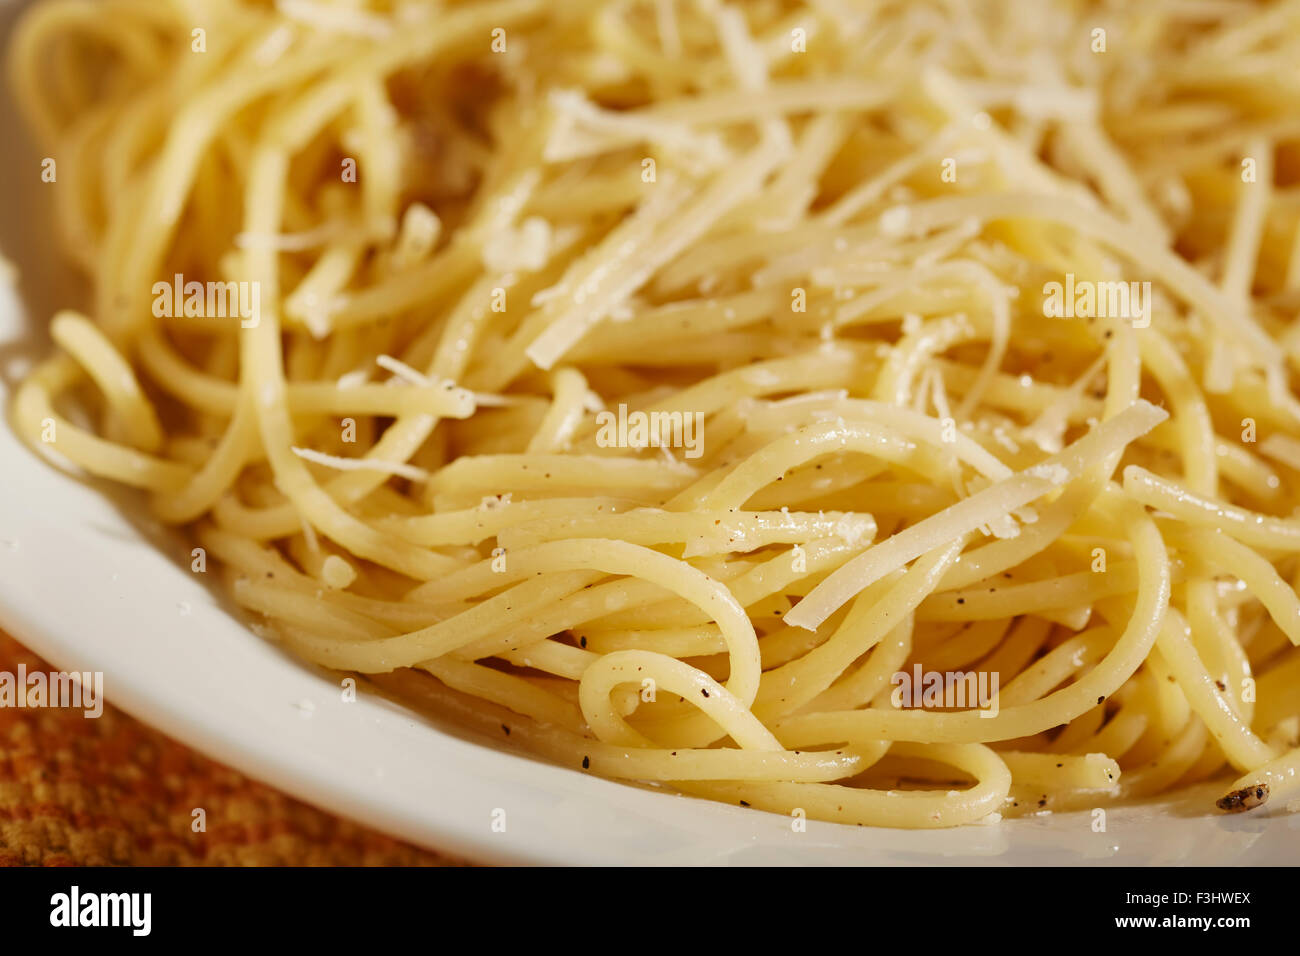 Cooked spaghetti with butter and shredded cheese Stock Photo